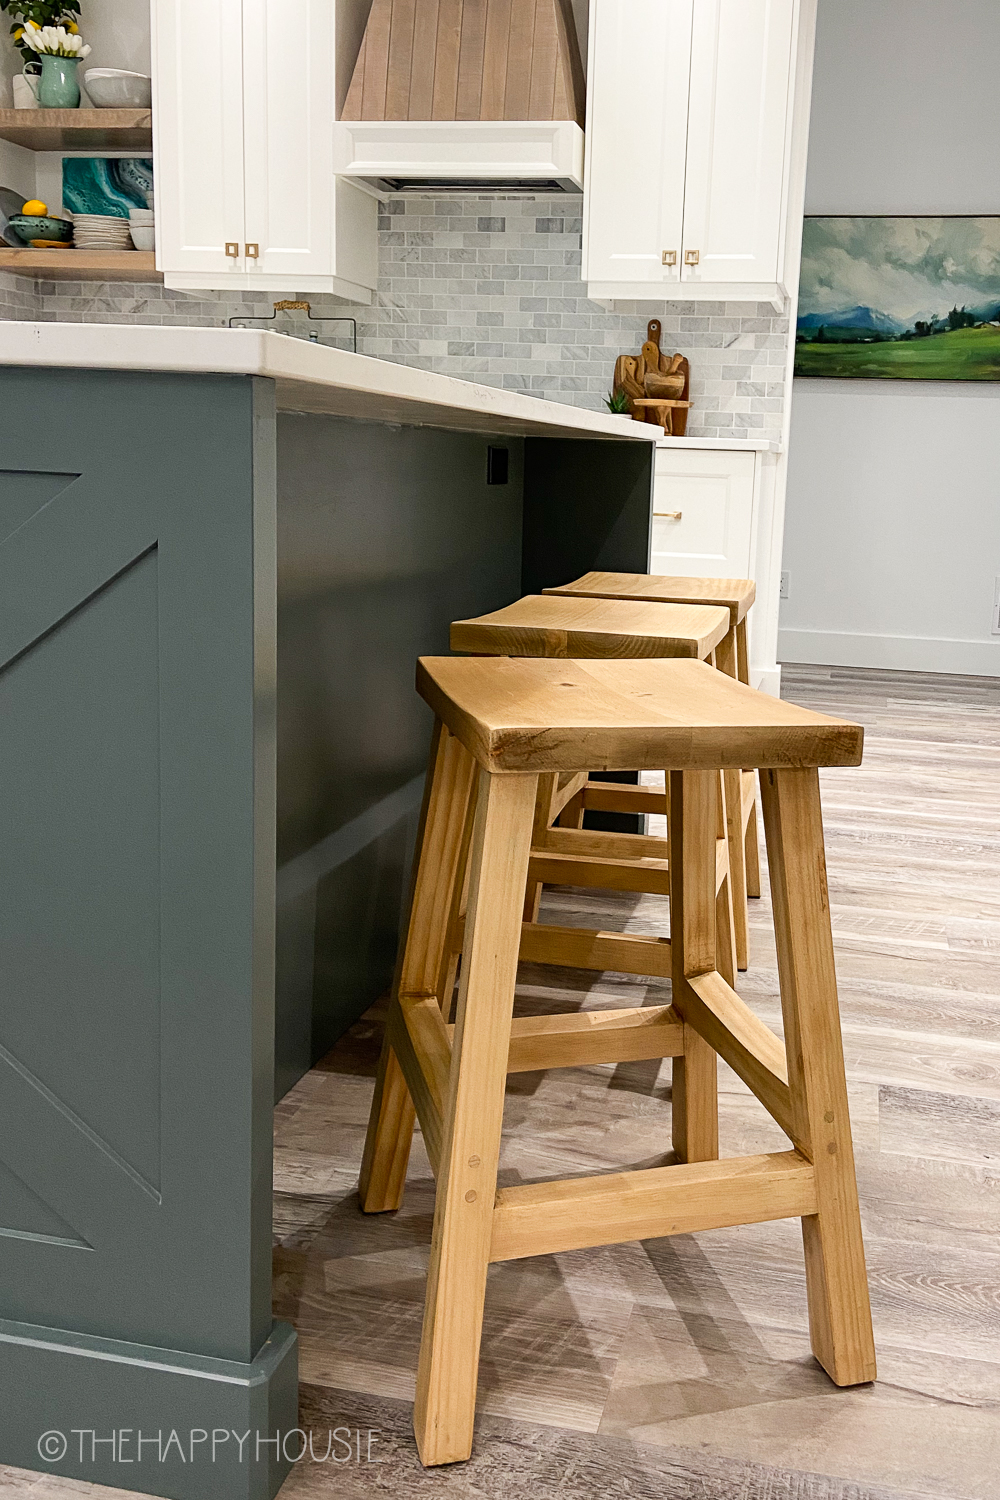 The wooden stools at the grey kitchen island.